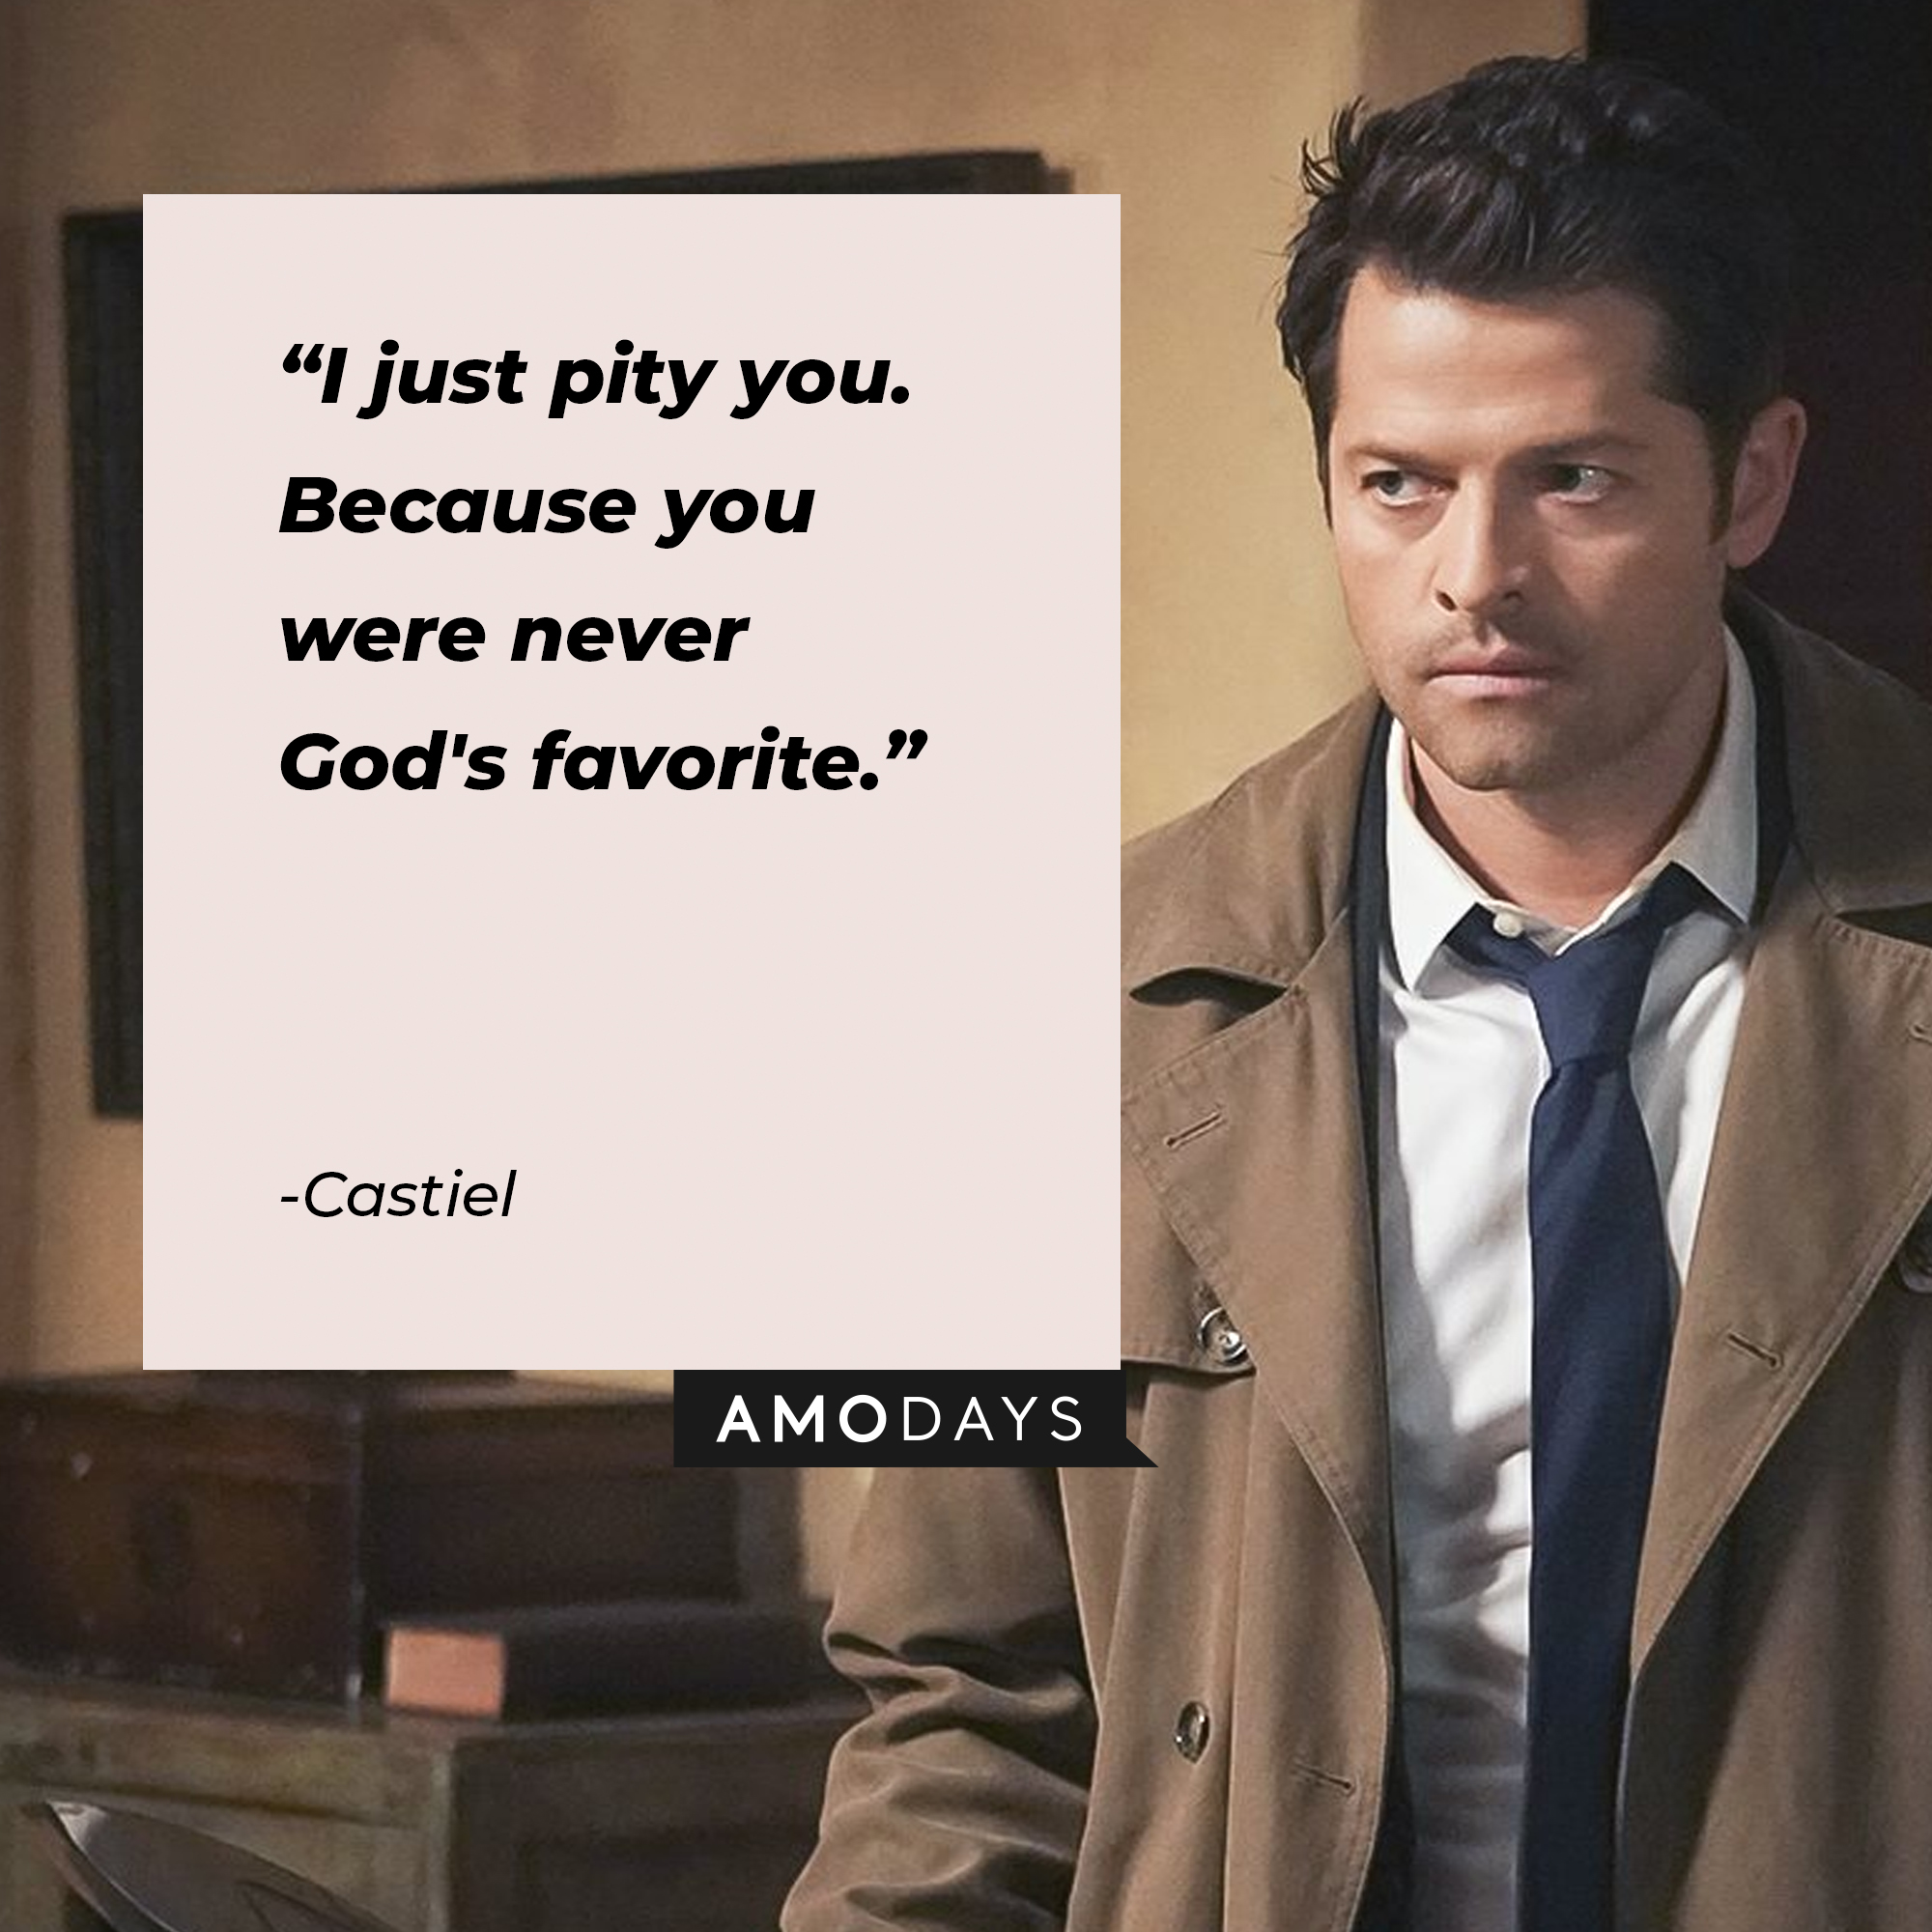 An image of Castiel with his quote: "I just pity you. Because you were never God's favorite." | Source: facebook.com/Supernatural